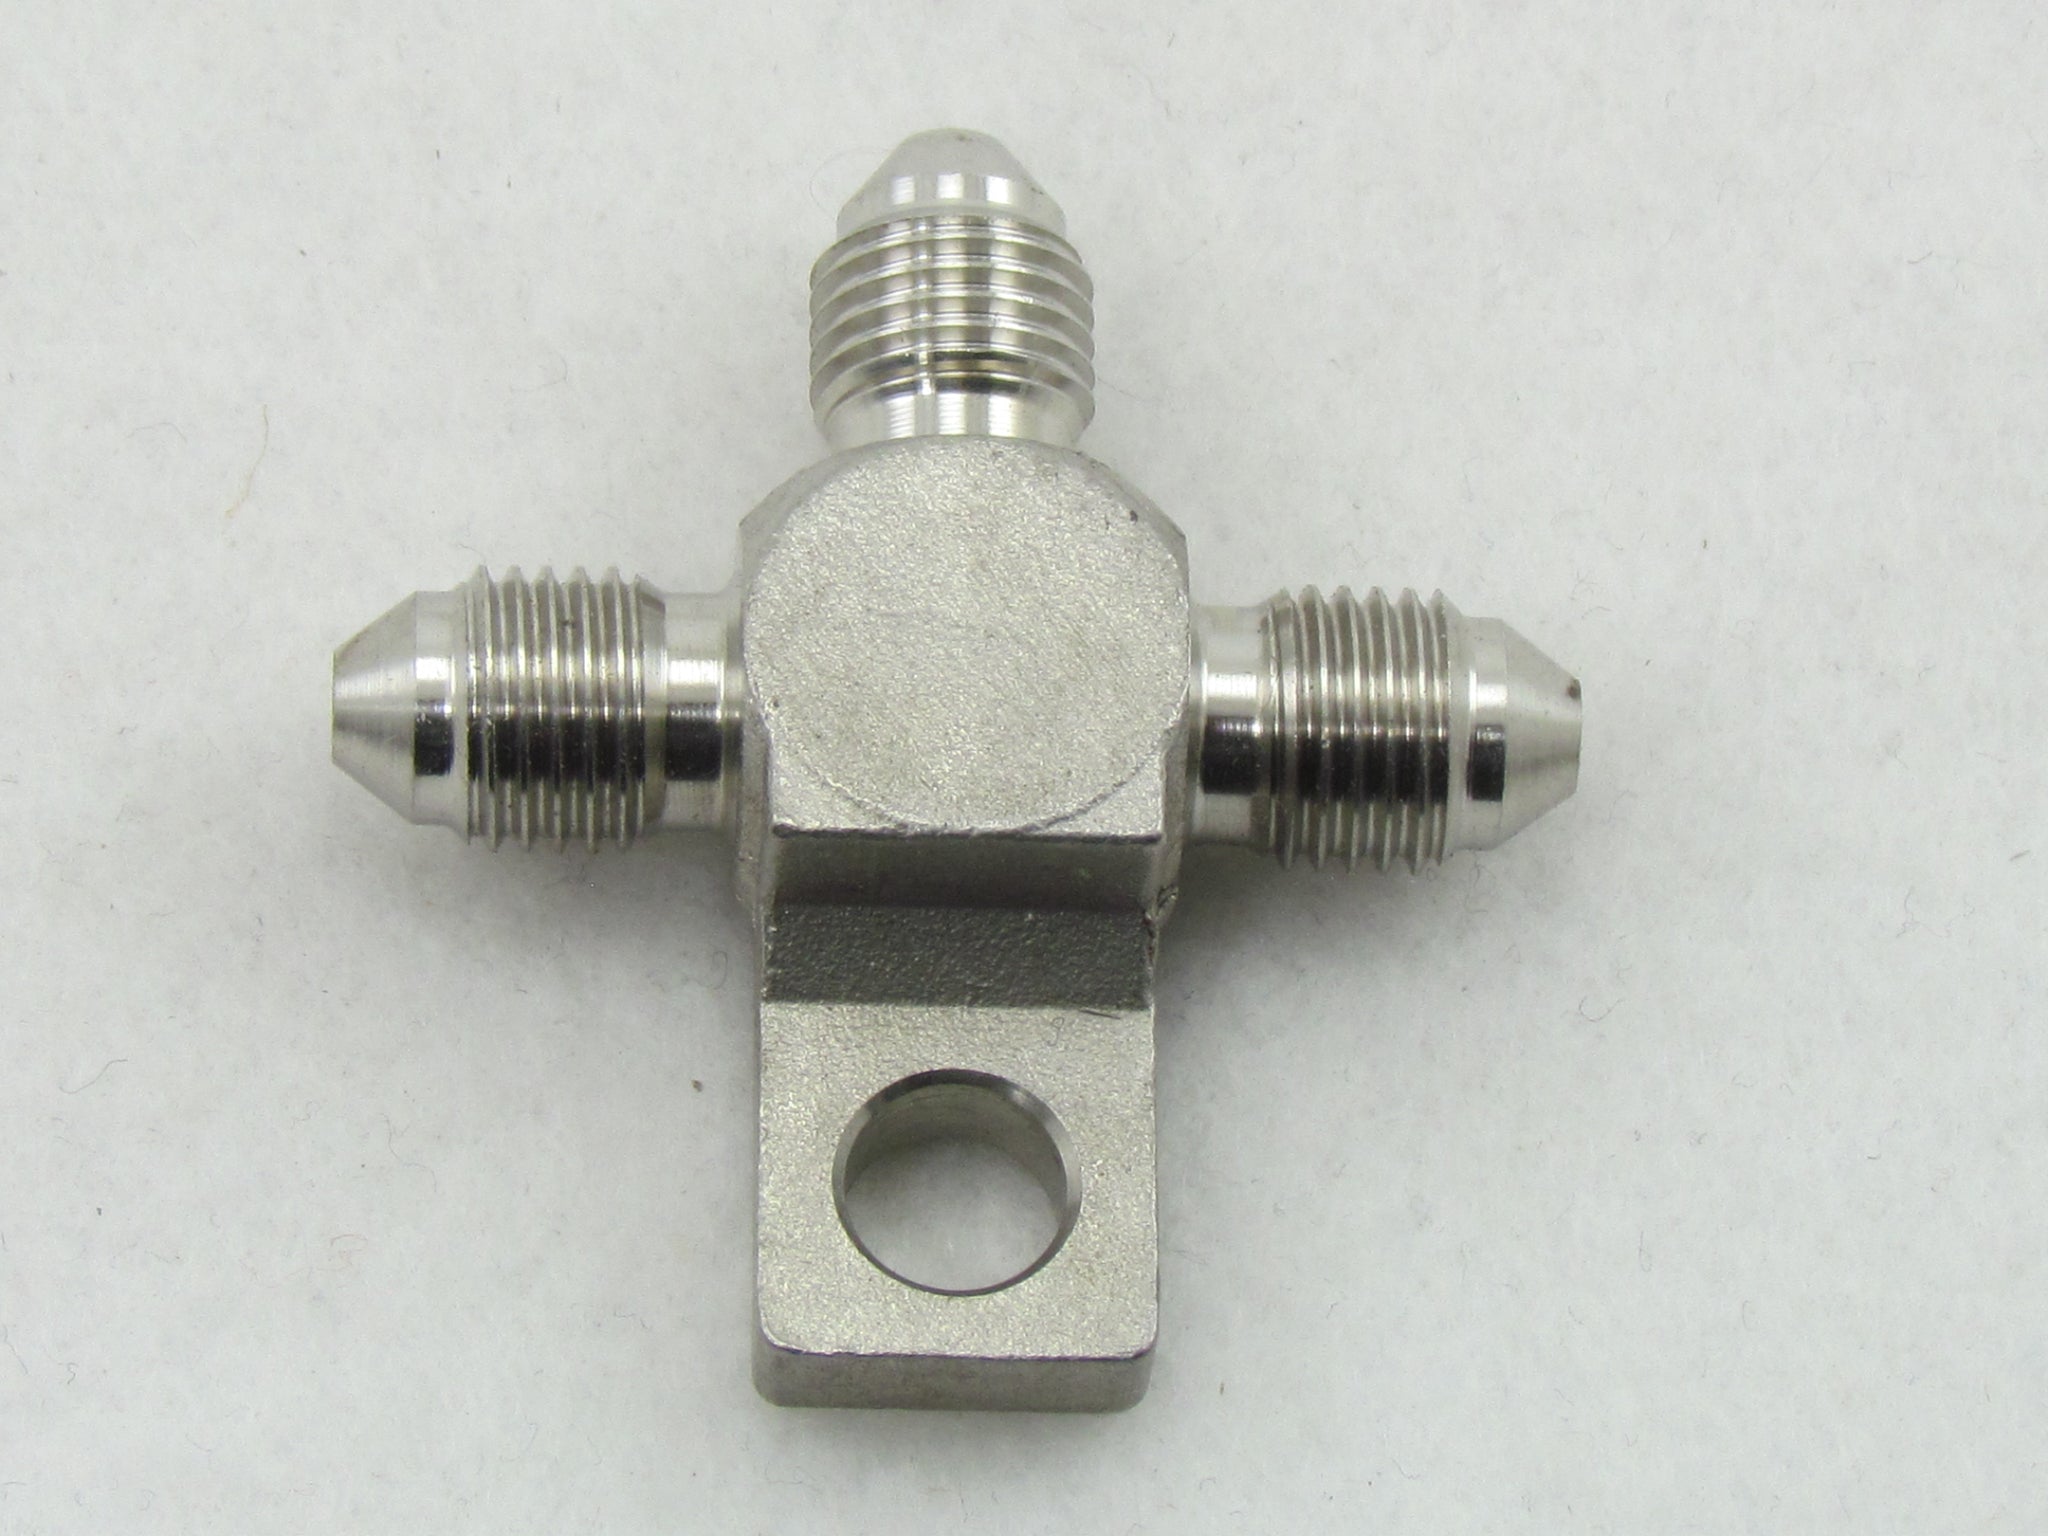 702 SERIES STAINLESS STEEL 3AN MALE FLARE TEE BLOCK with TAB